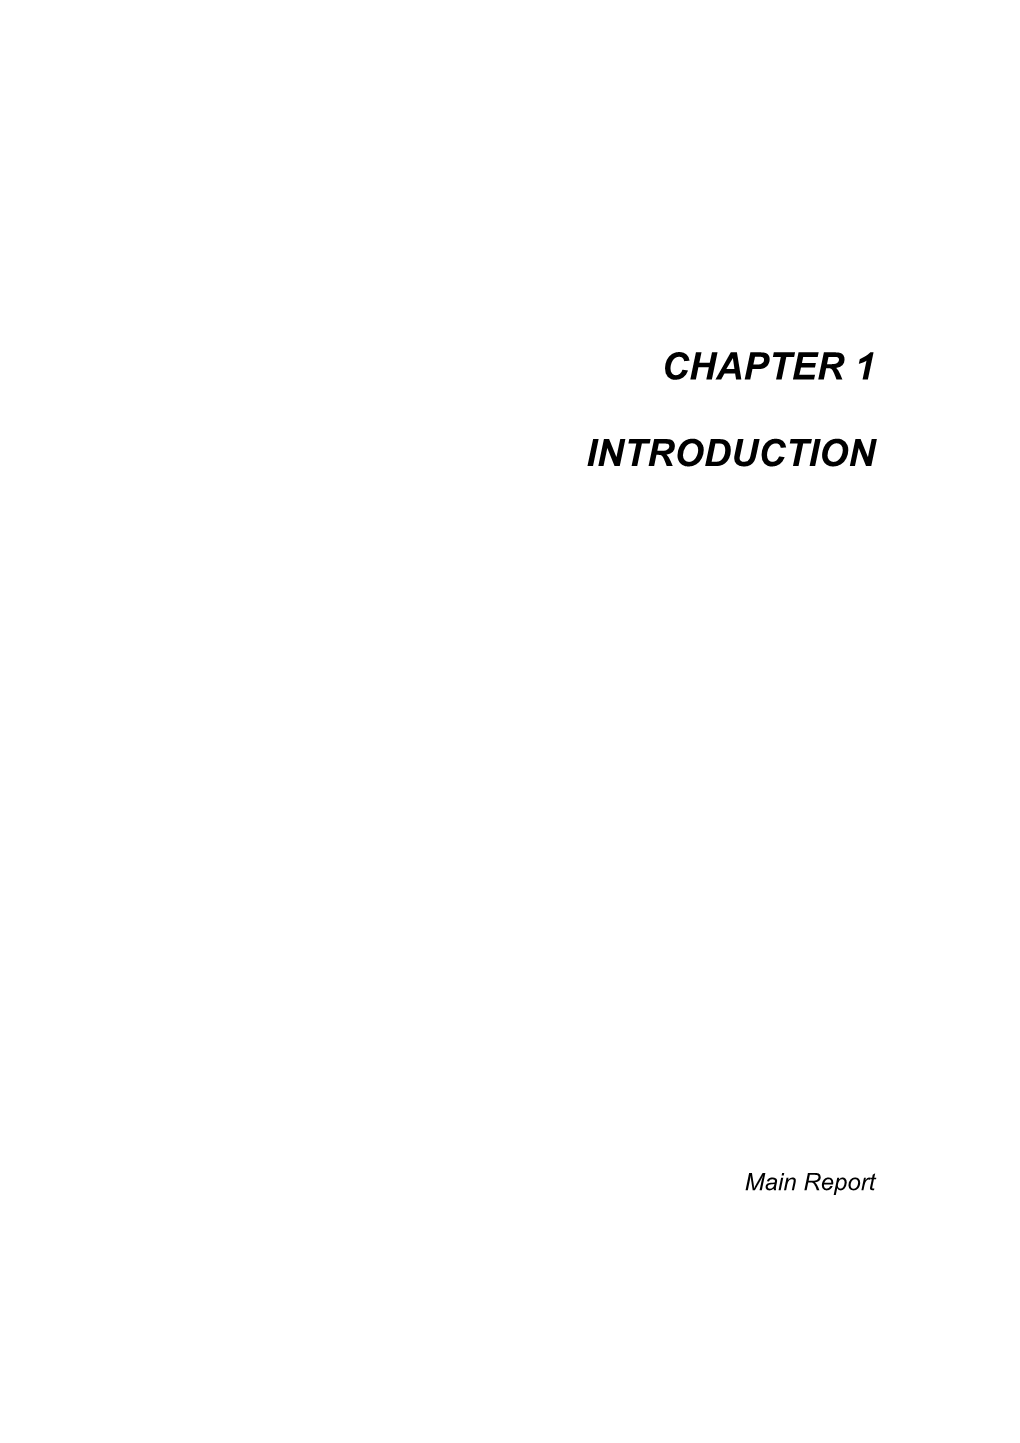 Chapter 1 Introduction Main Report CHAPTER 1 INTRODUCTION